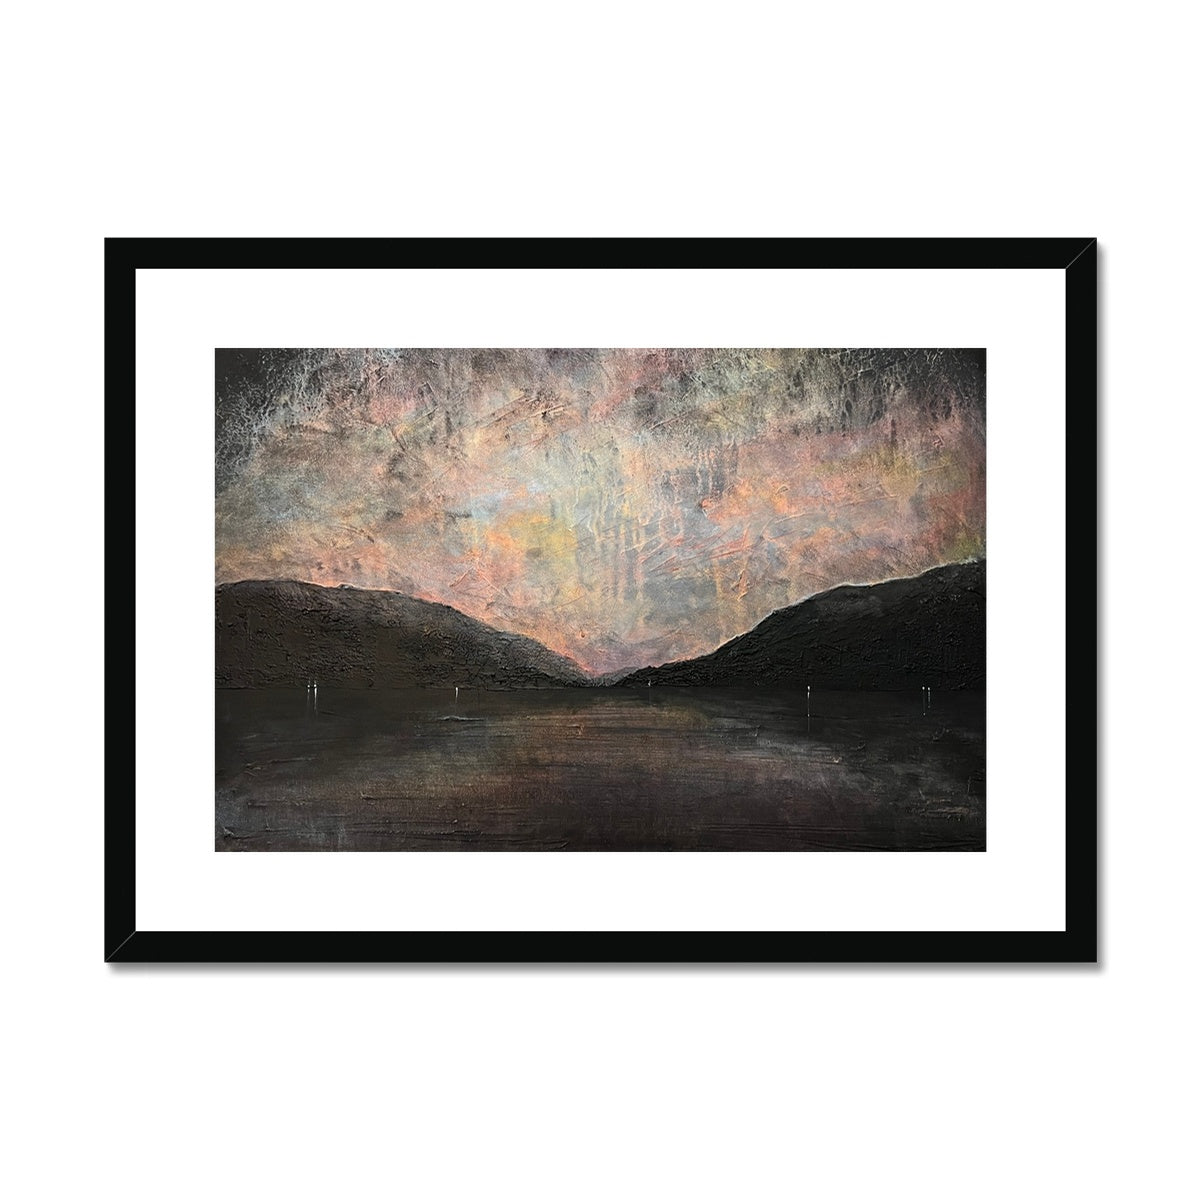 A Brooding Loch Lomond Painting | Framed & Mounted Prints From Scotland-Framed & Mounted Prints-Scottish Lochs & Mountains Art Gallery-A2 Landscape-Black Frame-Paintings, Prints, Homeware, Art Gifts From Scotland By Scottish Artist Kevin Hunter